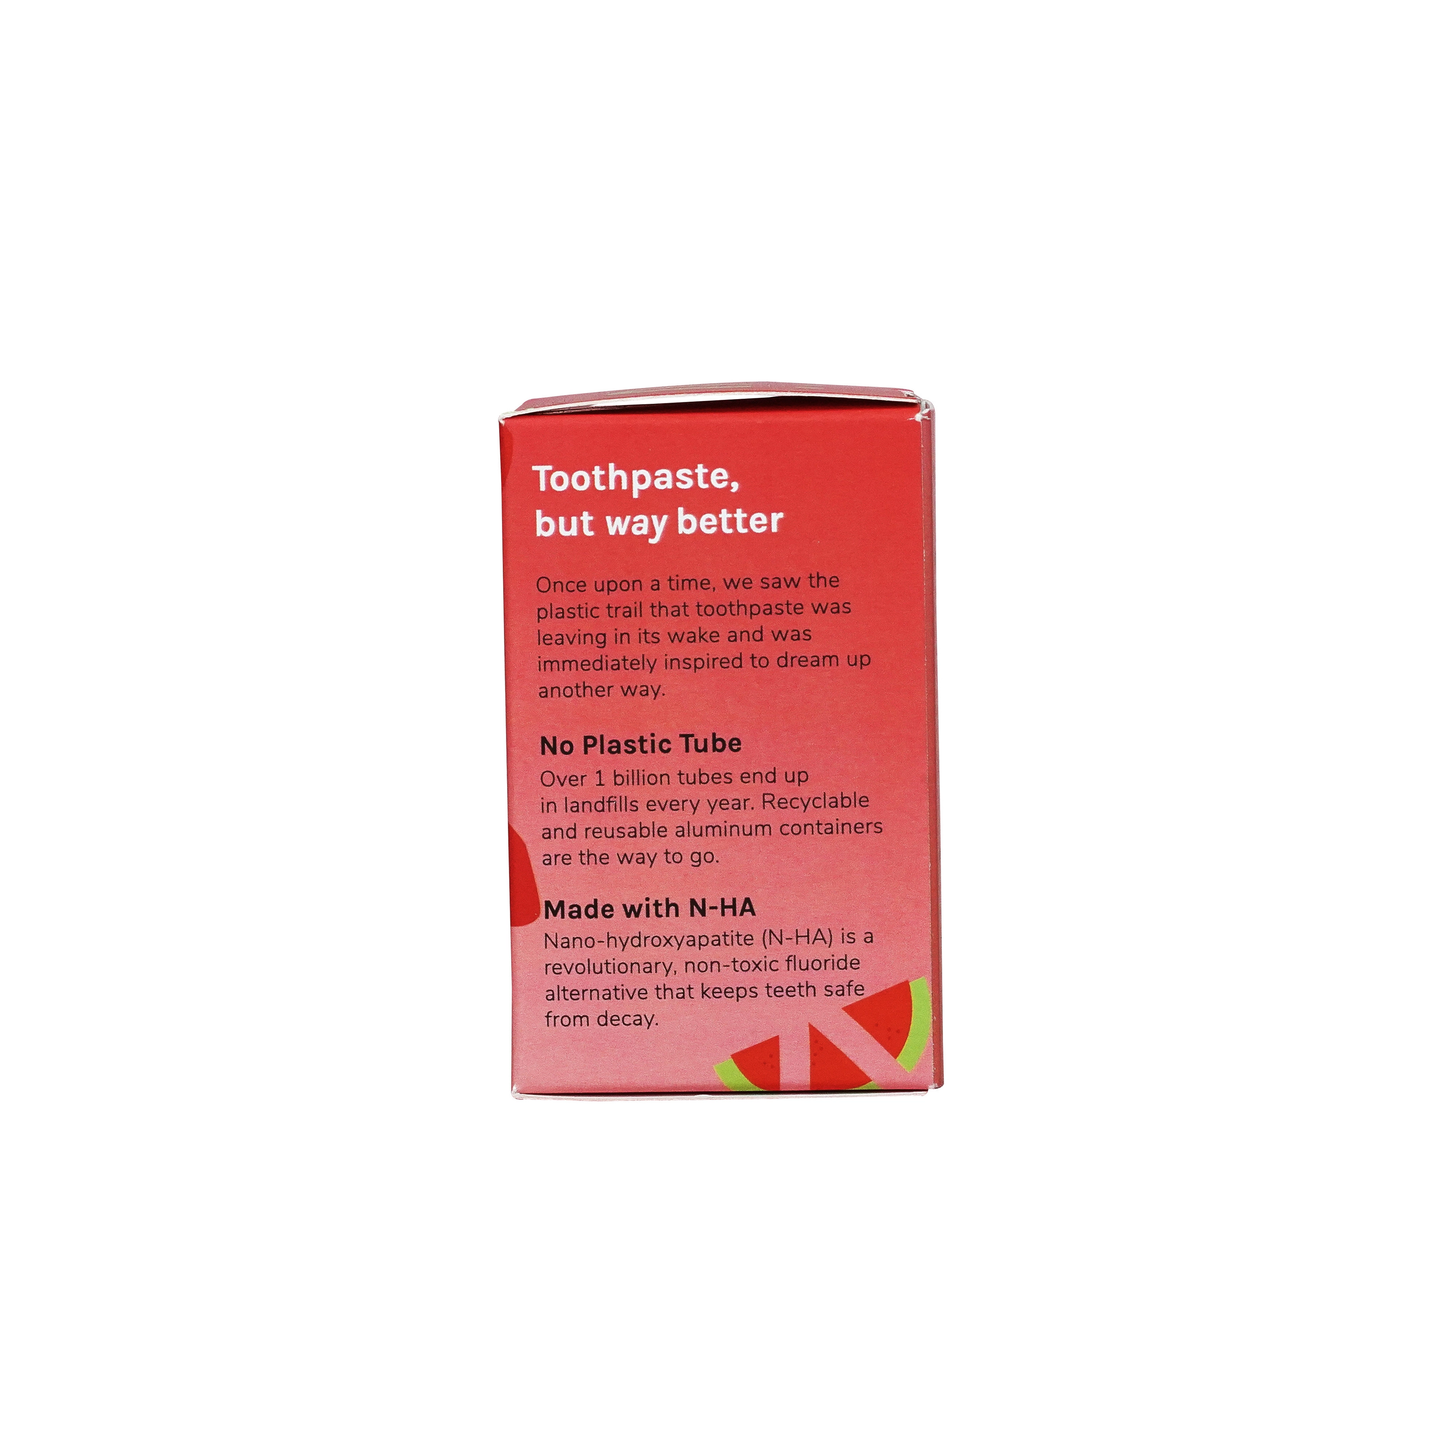 Toothpaste Tablets Kid's - Watermelon Strawberry